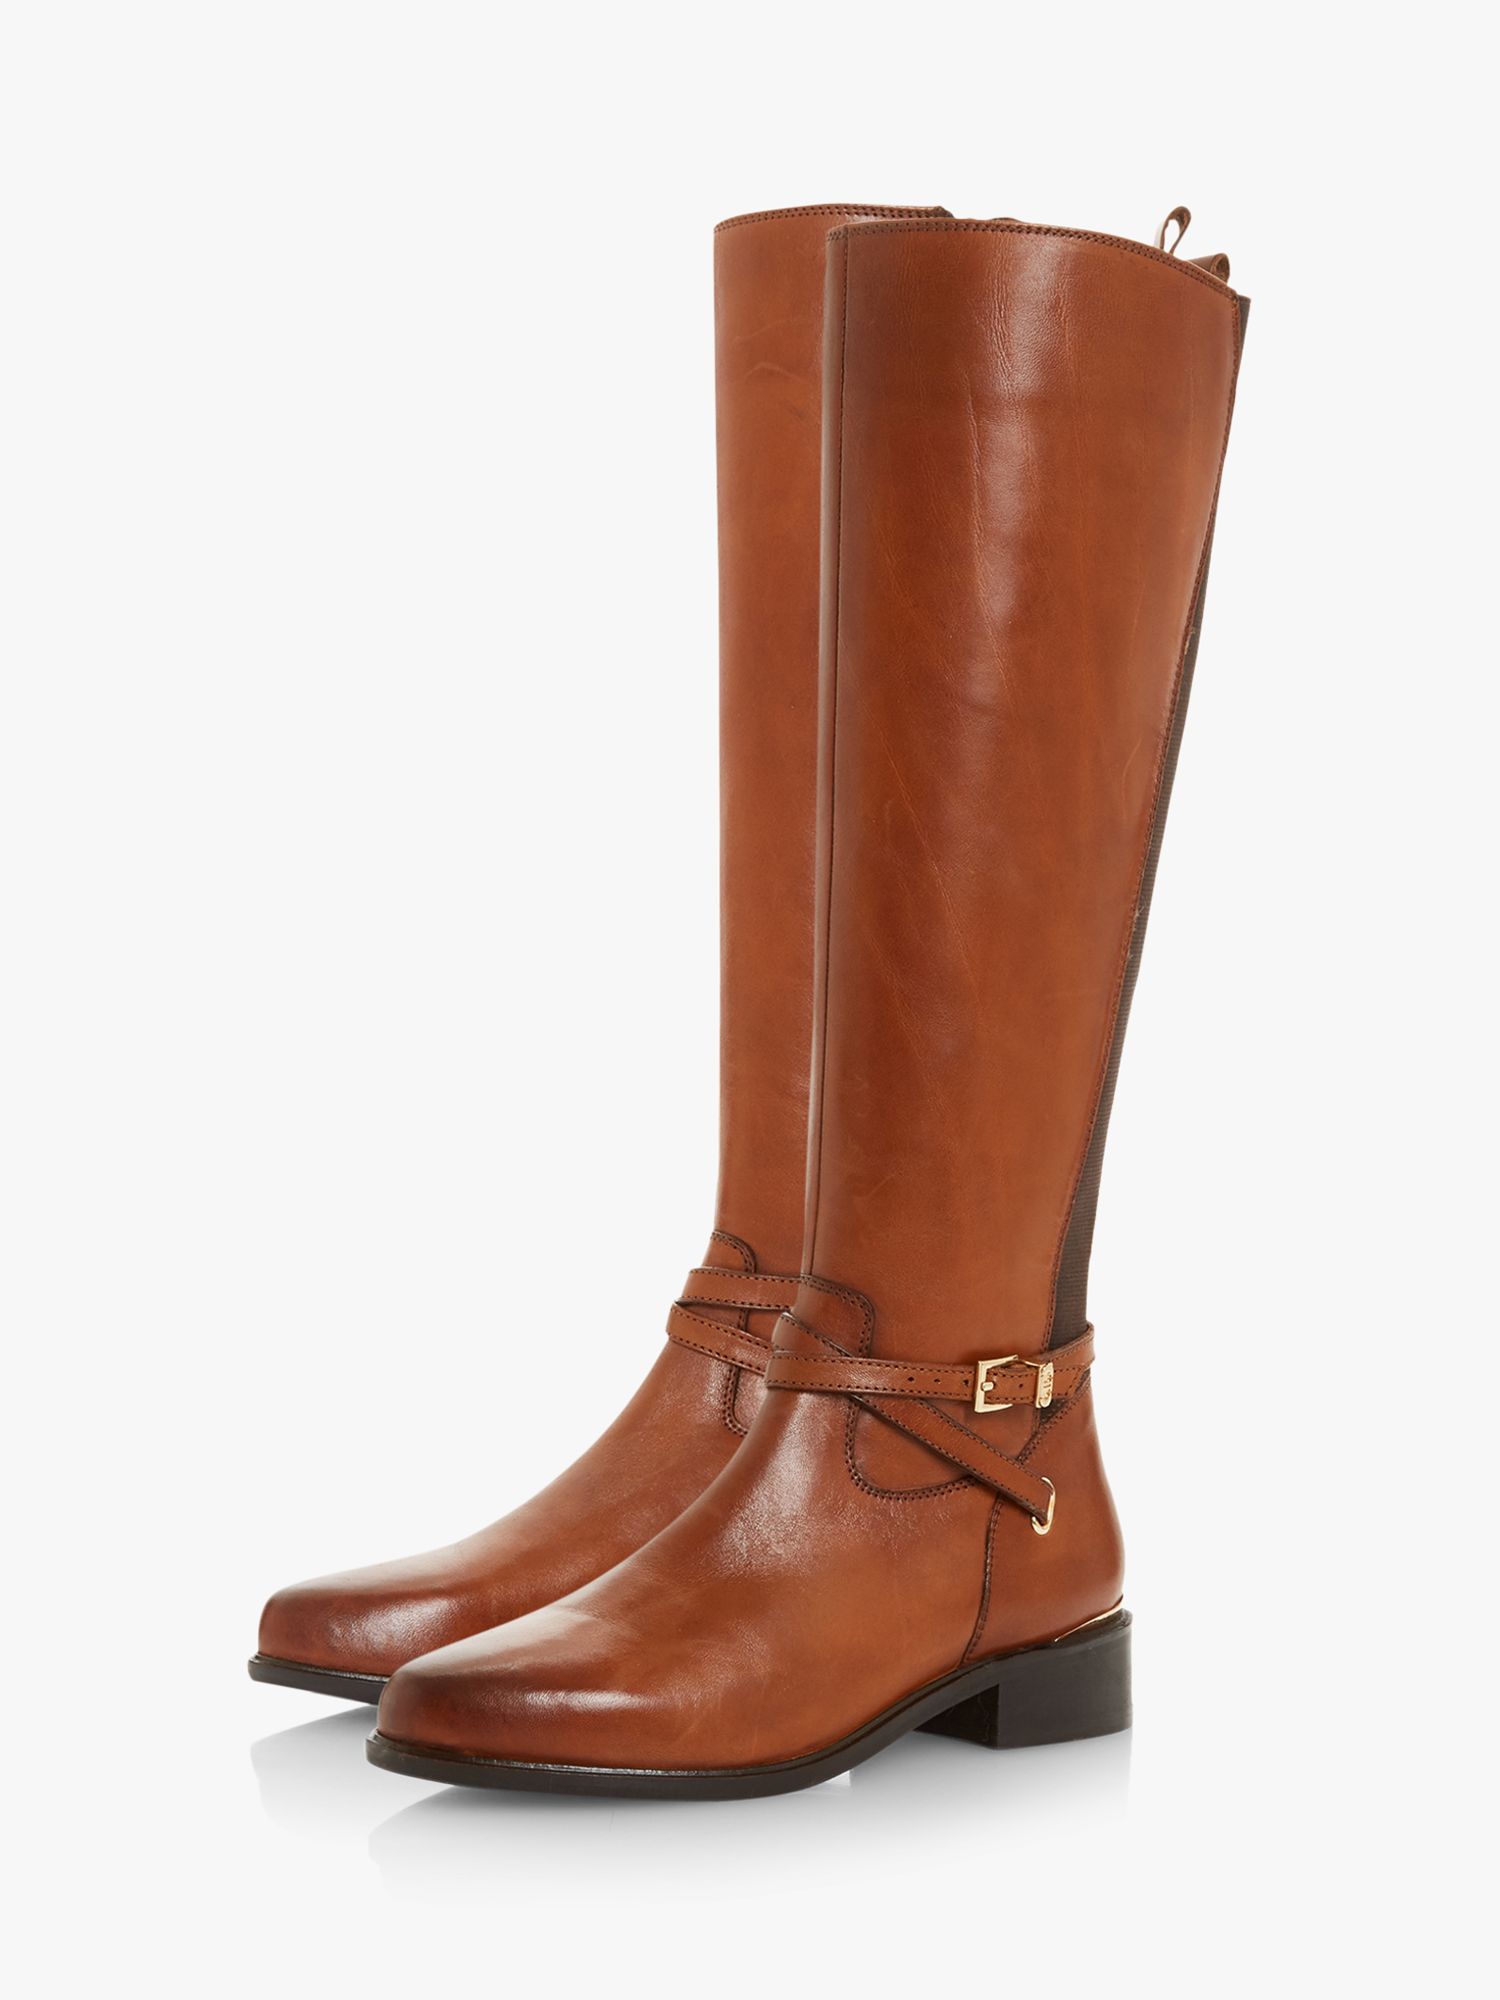 Dune True Leather Buckle Knee High Boots, Tan at John Lewis & Partners